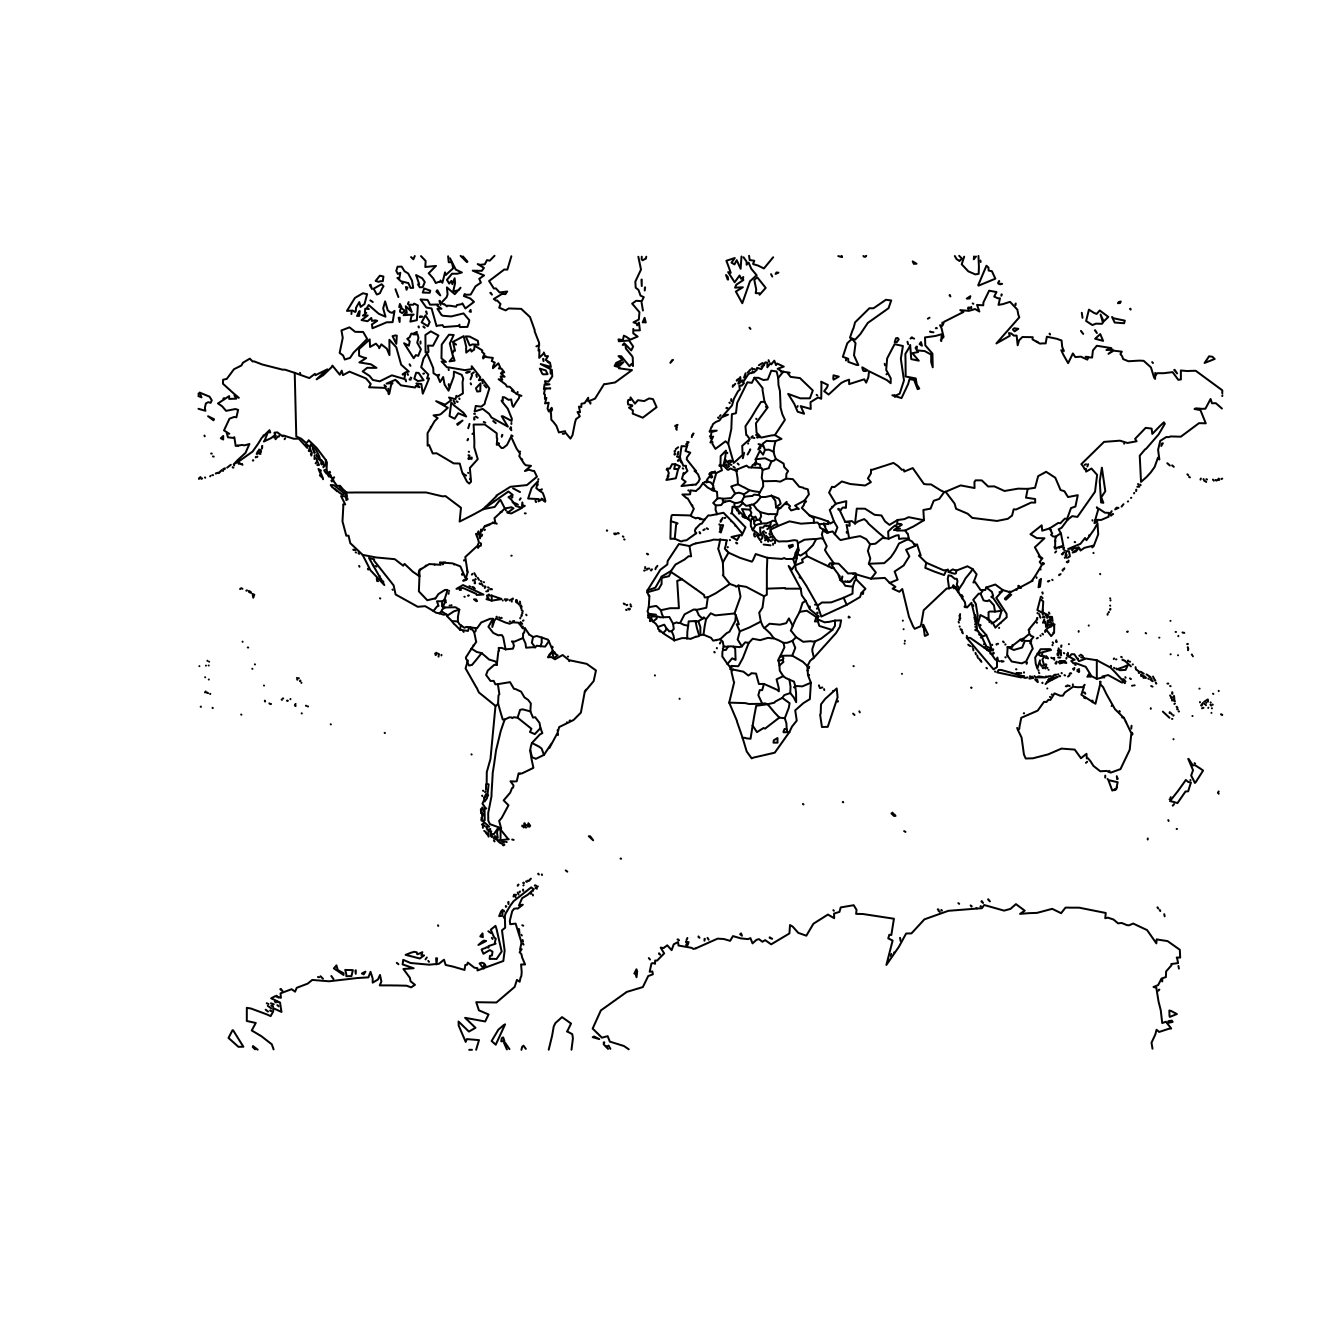 The world according to the Mercator (left) and Gall--Peters (right) projections.